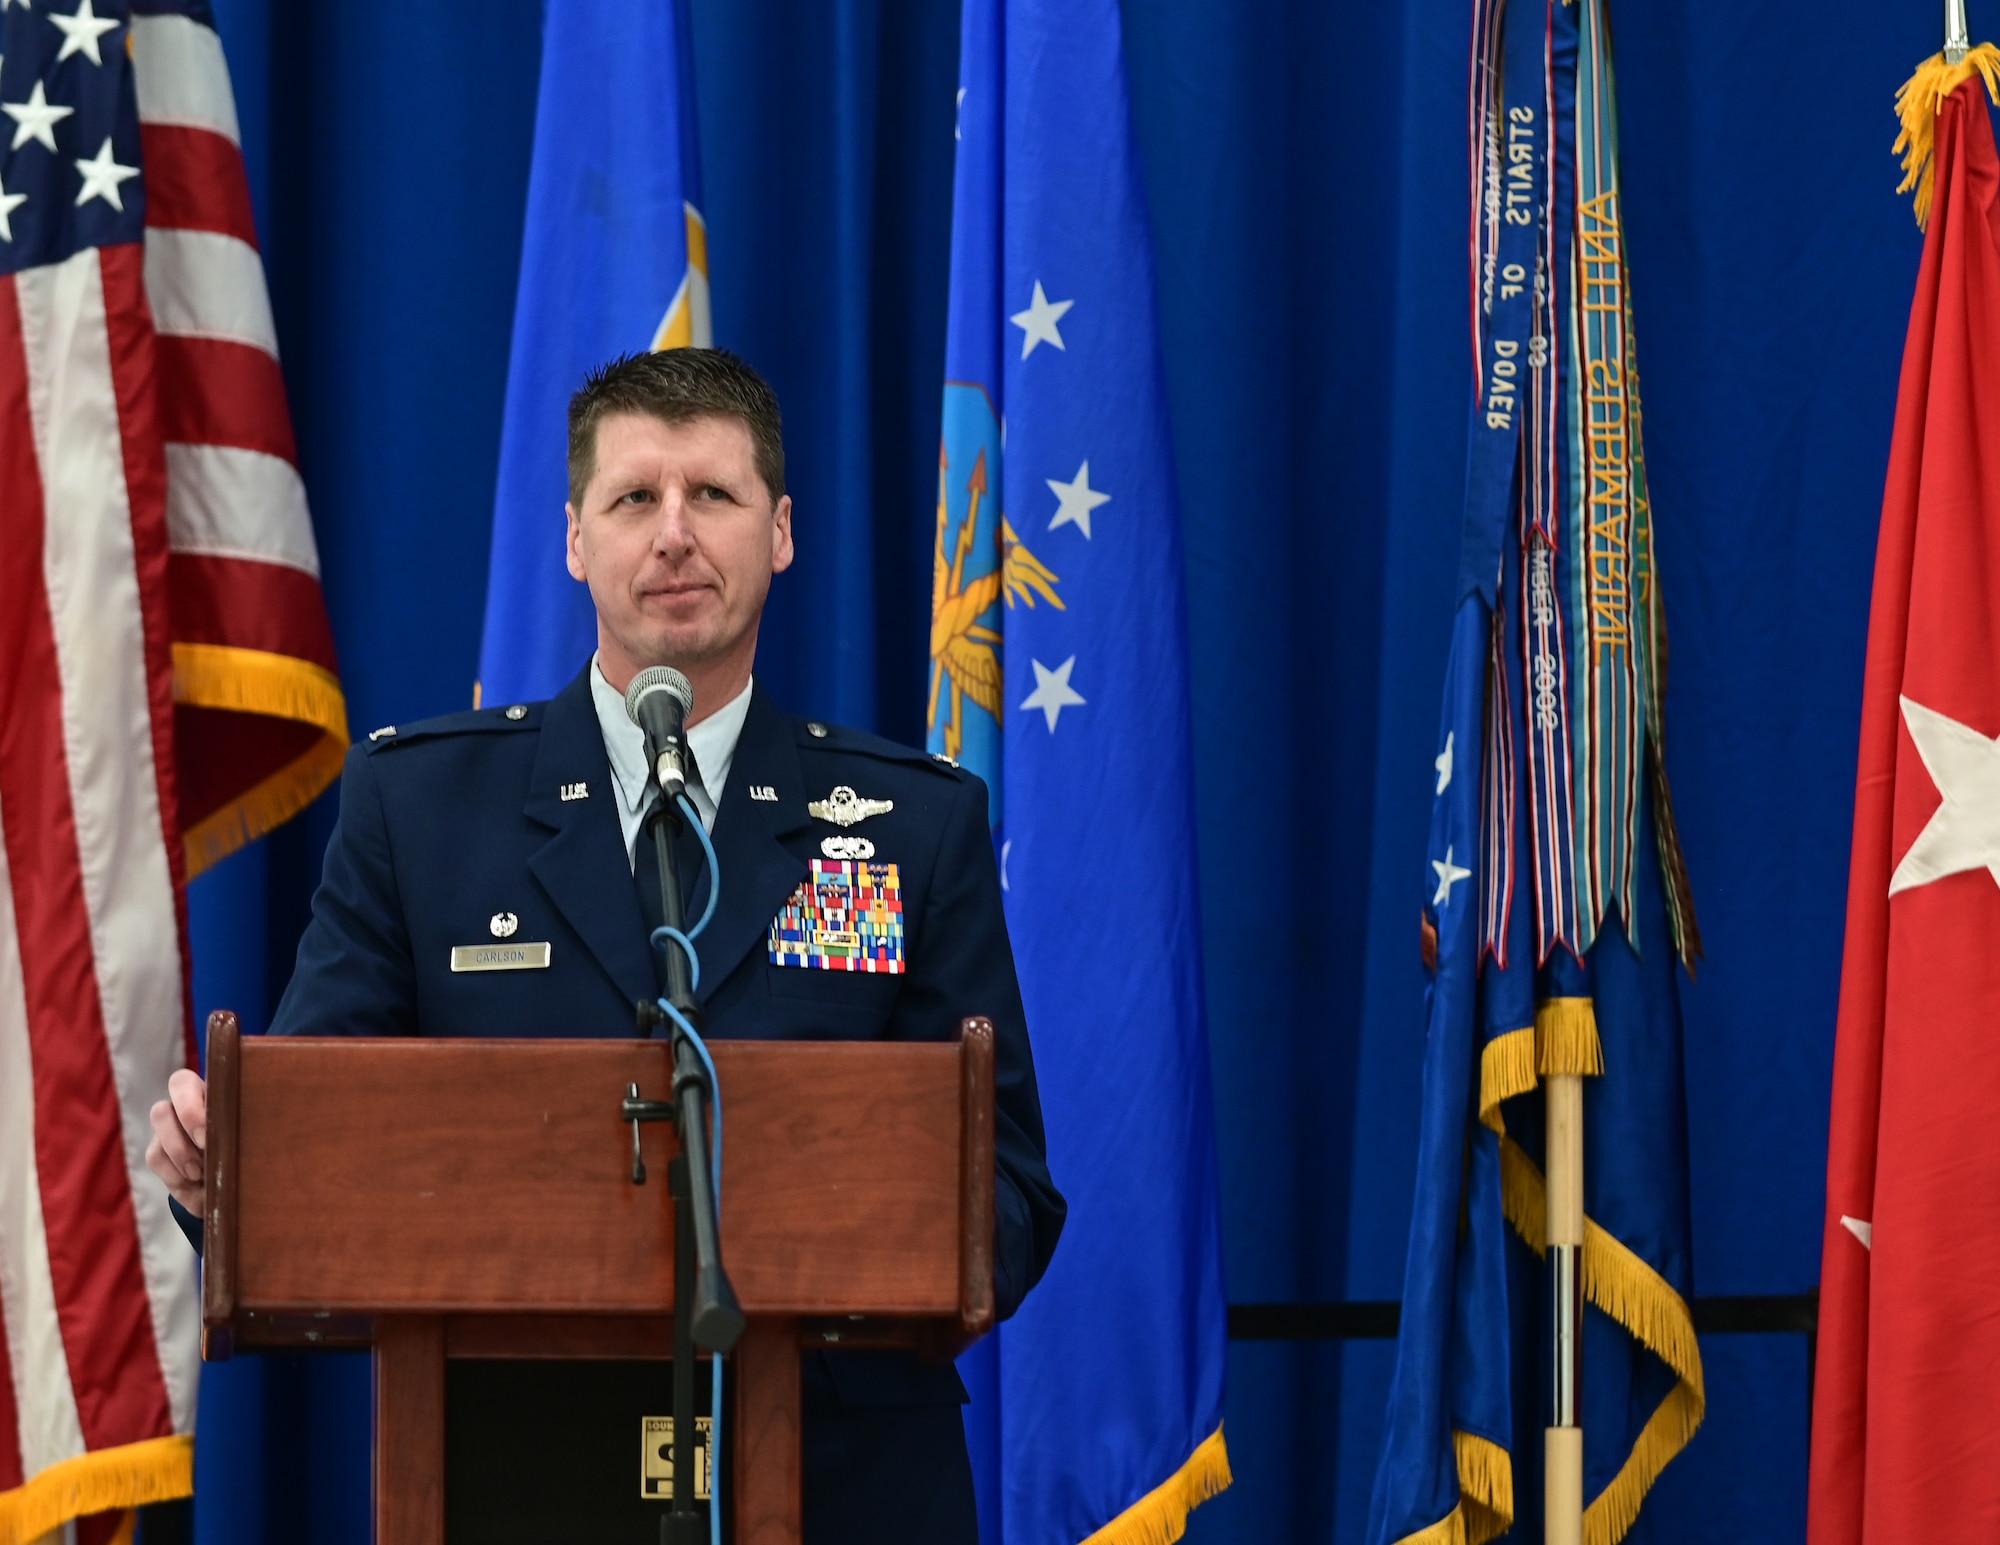 U.S. Air Force Col. Jesse Carlson, 133rd Airlift Wing commander, speaks to Airmen, family, and friends after receiving command in St. Paul, Minn., March 4, 2023.